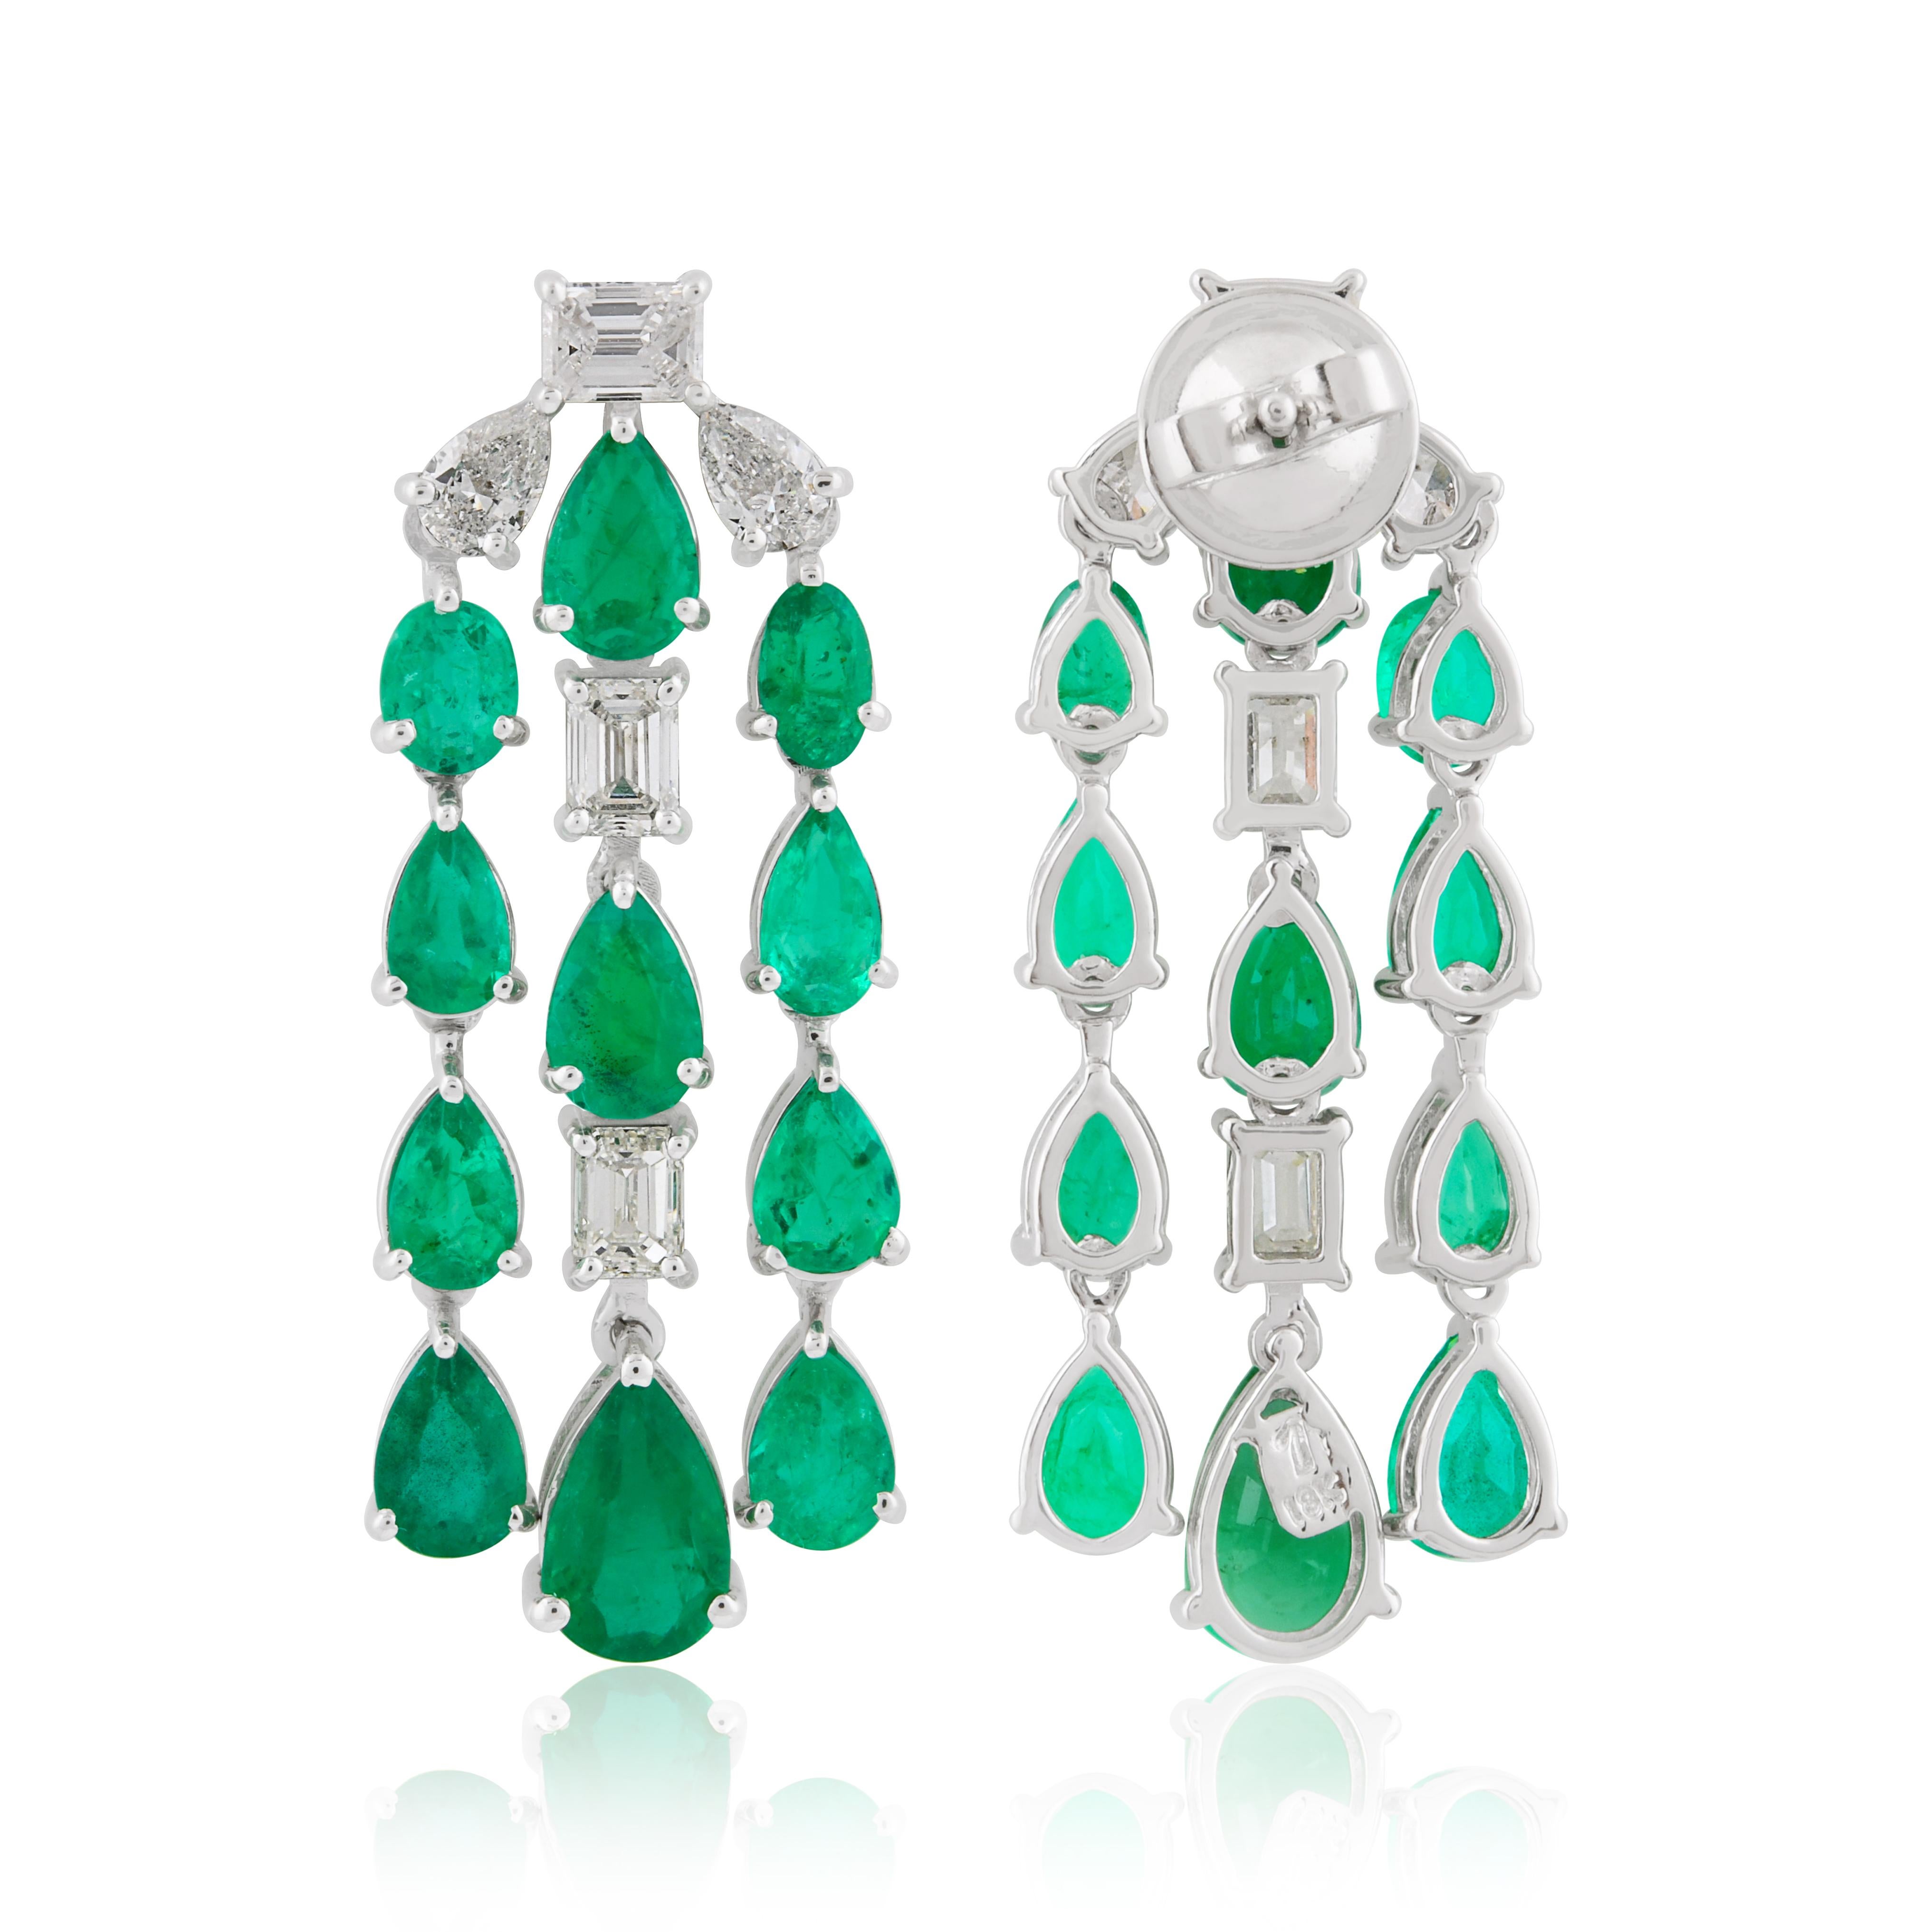 Item Code :- SEE-11785
Gross Wt :- 10.42 gm
18k White Gold Wt :- 8.65 gm
Diamond Wt :- 1.95 Ct. ( AVERAGE DIAMOND CLARITY SI1-SI2 & COLOR H-I )
Emerald Wt :- 6.88 Ct.
Earrings Size :- 35 mm approx.
✦ Sizing
.....................
We can adjust most